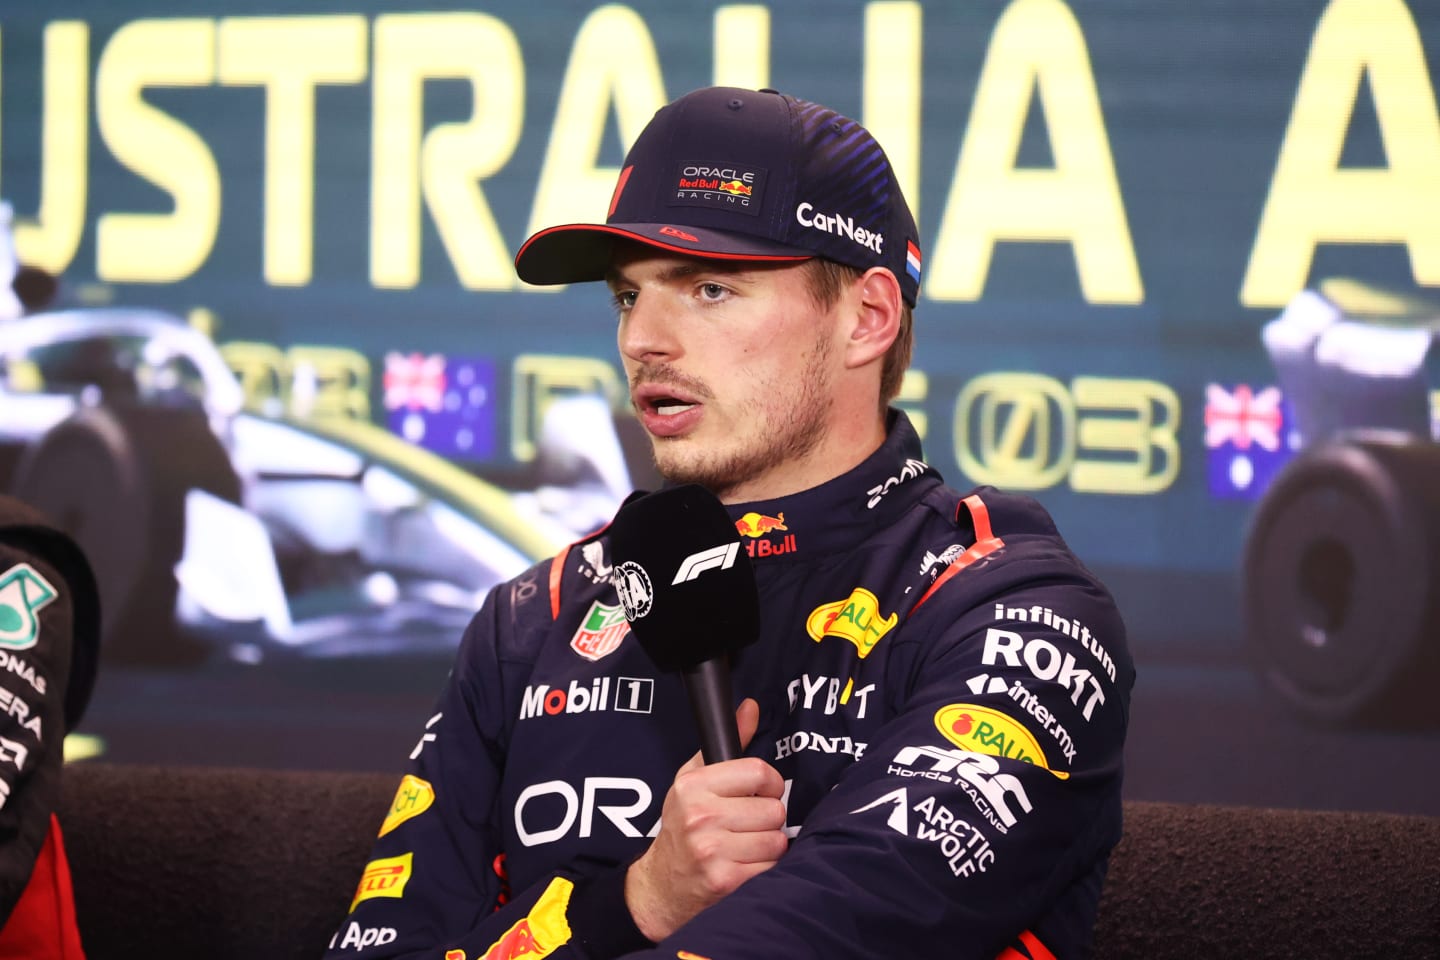 MELBOURNE, AUSTRALIA - APRIL 01: Pole position qualifier Max Verstappen of the Netherlands and Oracle Red Bull Racing attends the press conference after qualifying ahead of the F1 Grand Prix of Australia at Albert Park Grand Prix Circuit on April 01, 2023 in Melbourne, Australia. (Photo by Robert Cianflone/Getty Images)